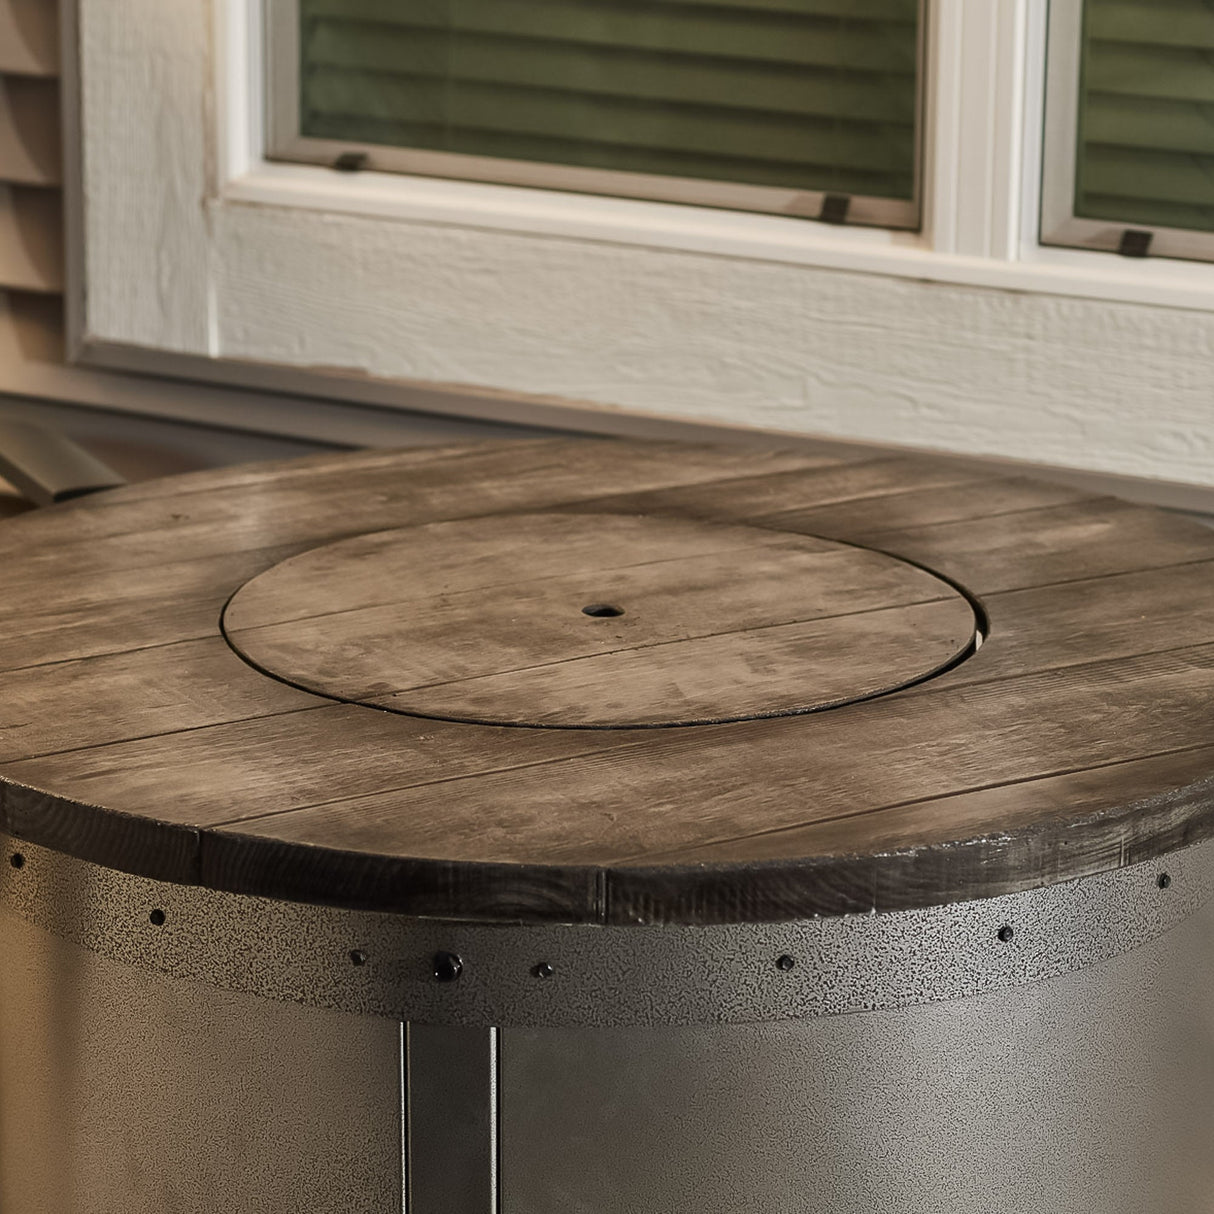 A close up view of the cover that goes on the burner of an Edison Round Gas Fire Pit Table